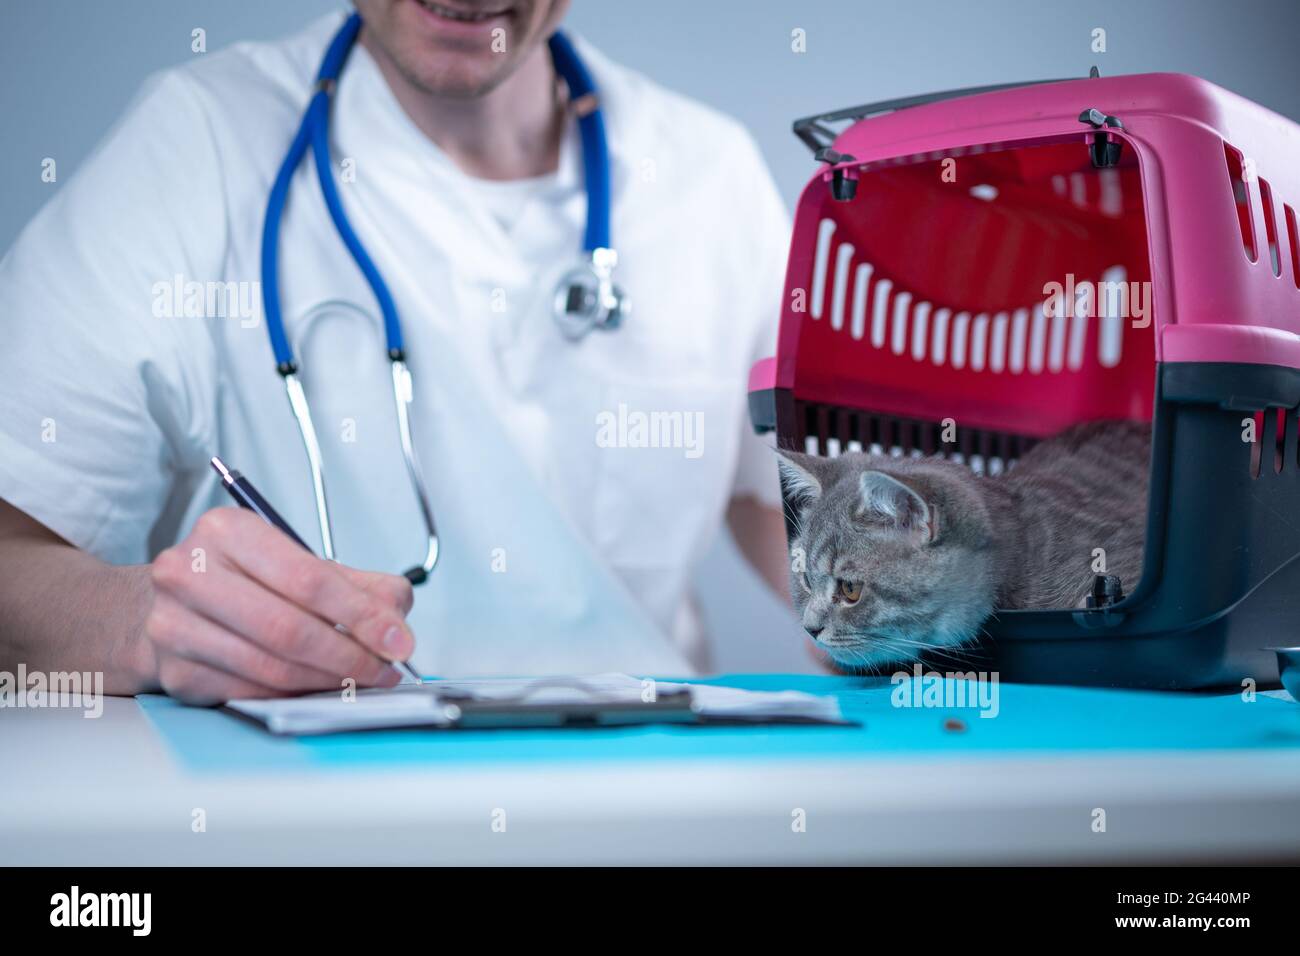 Male veterinarian takes notes on health check of gray Scottish Straight kitten in animal carrier on examination table in clinic. Stock Photo